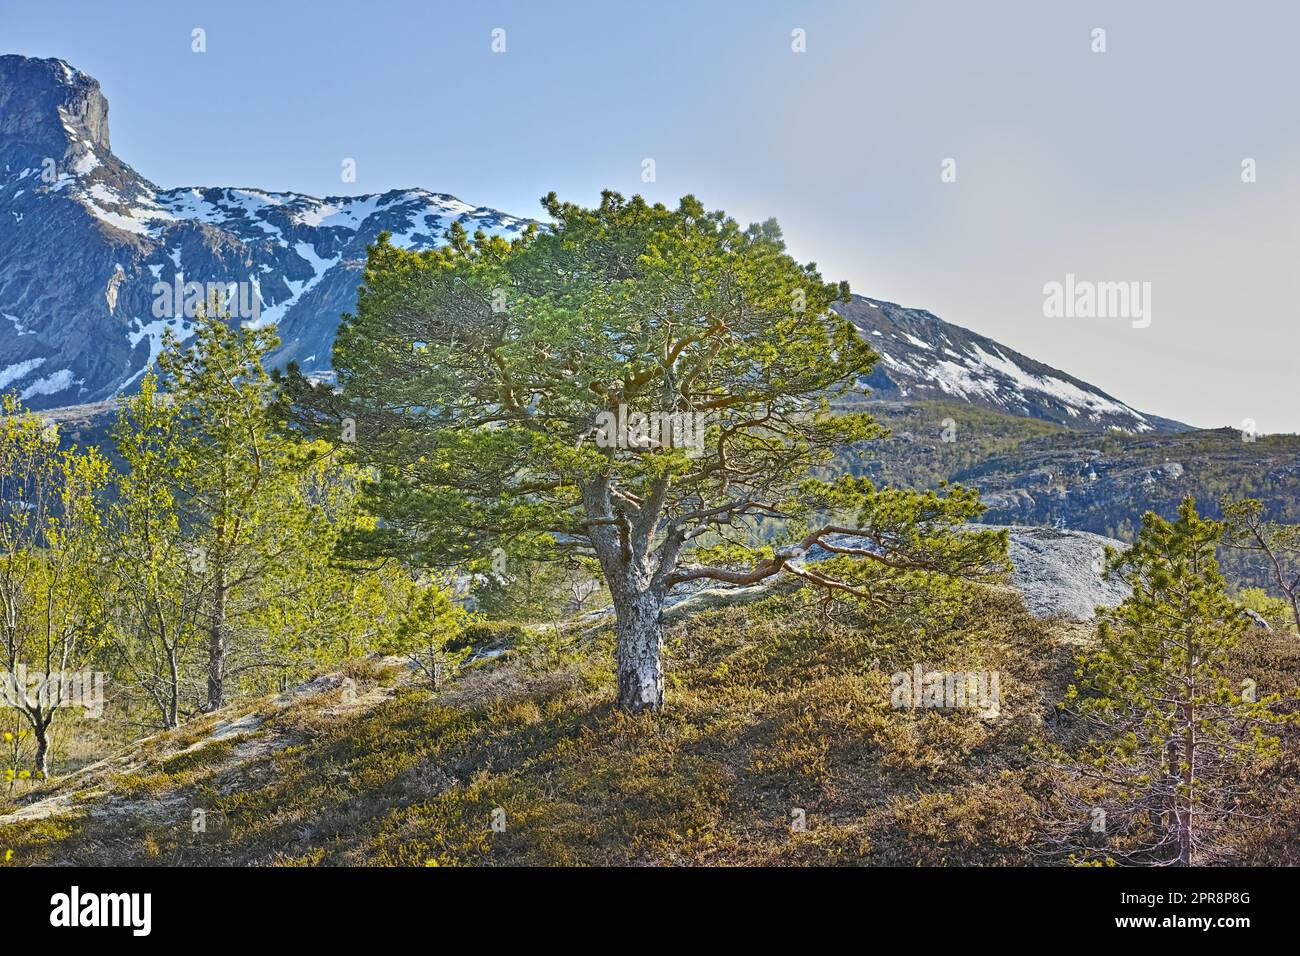 Forest trees by the mountains with melting snow in early Spring on a blue sky with copy space. Landscape of a big tree with lush green leaves, branches and grass land near a rocky mountain in Norway Stock Photo